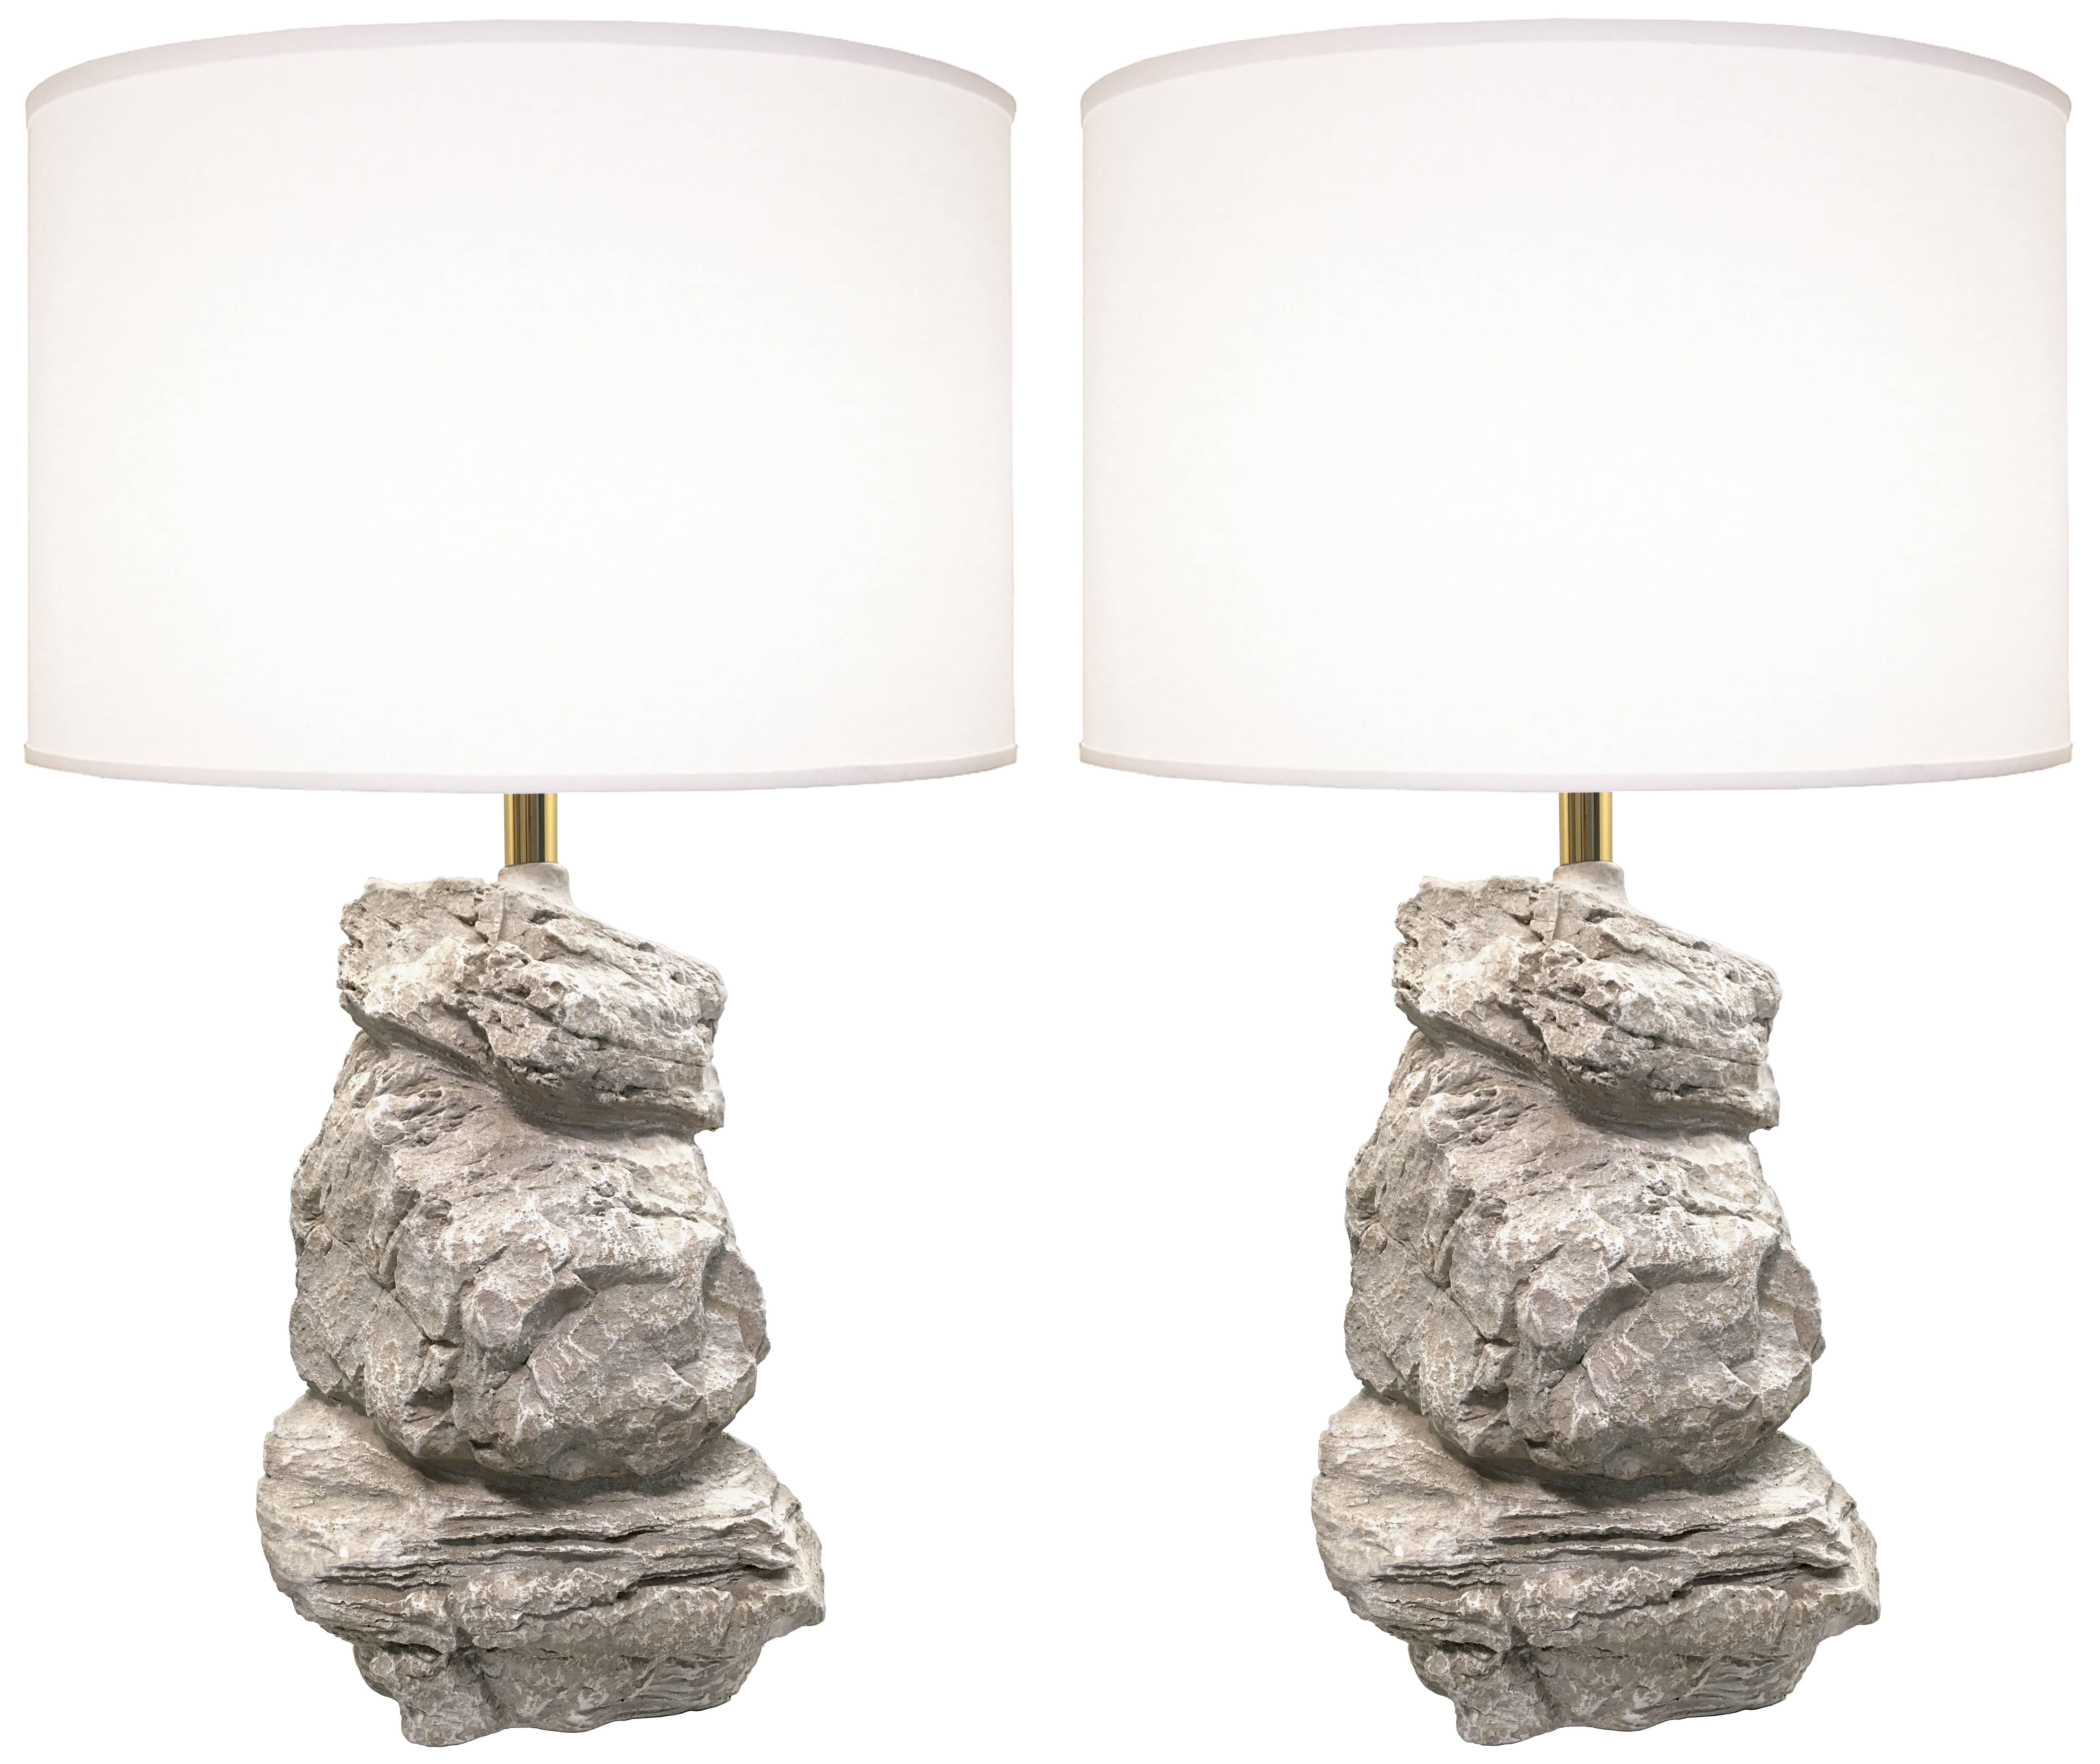 A pair of rock-form sculptural lamps with brass hardware.

American, 1980's

Measurements of body of lamps: 17